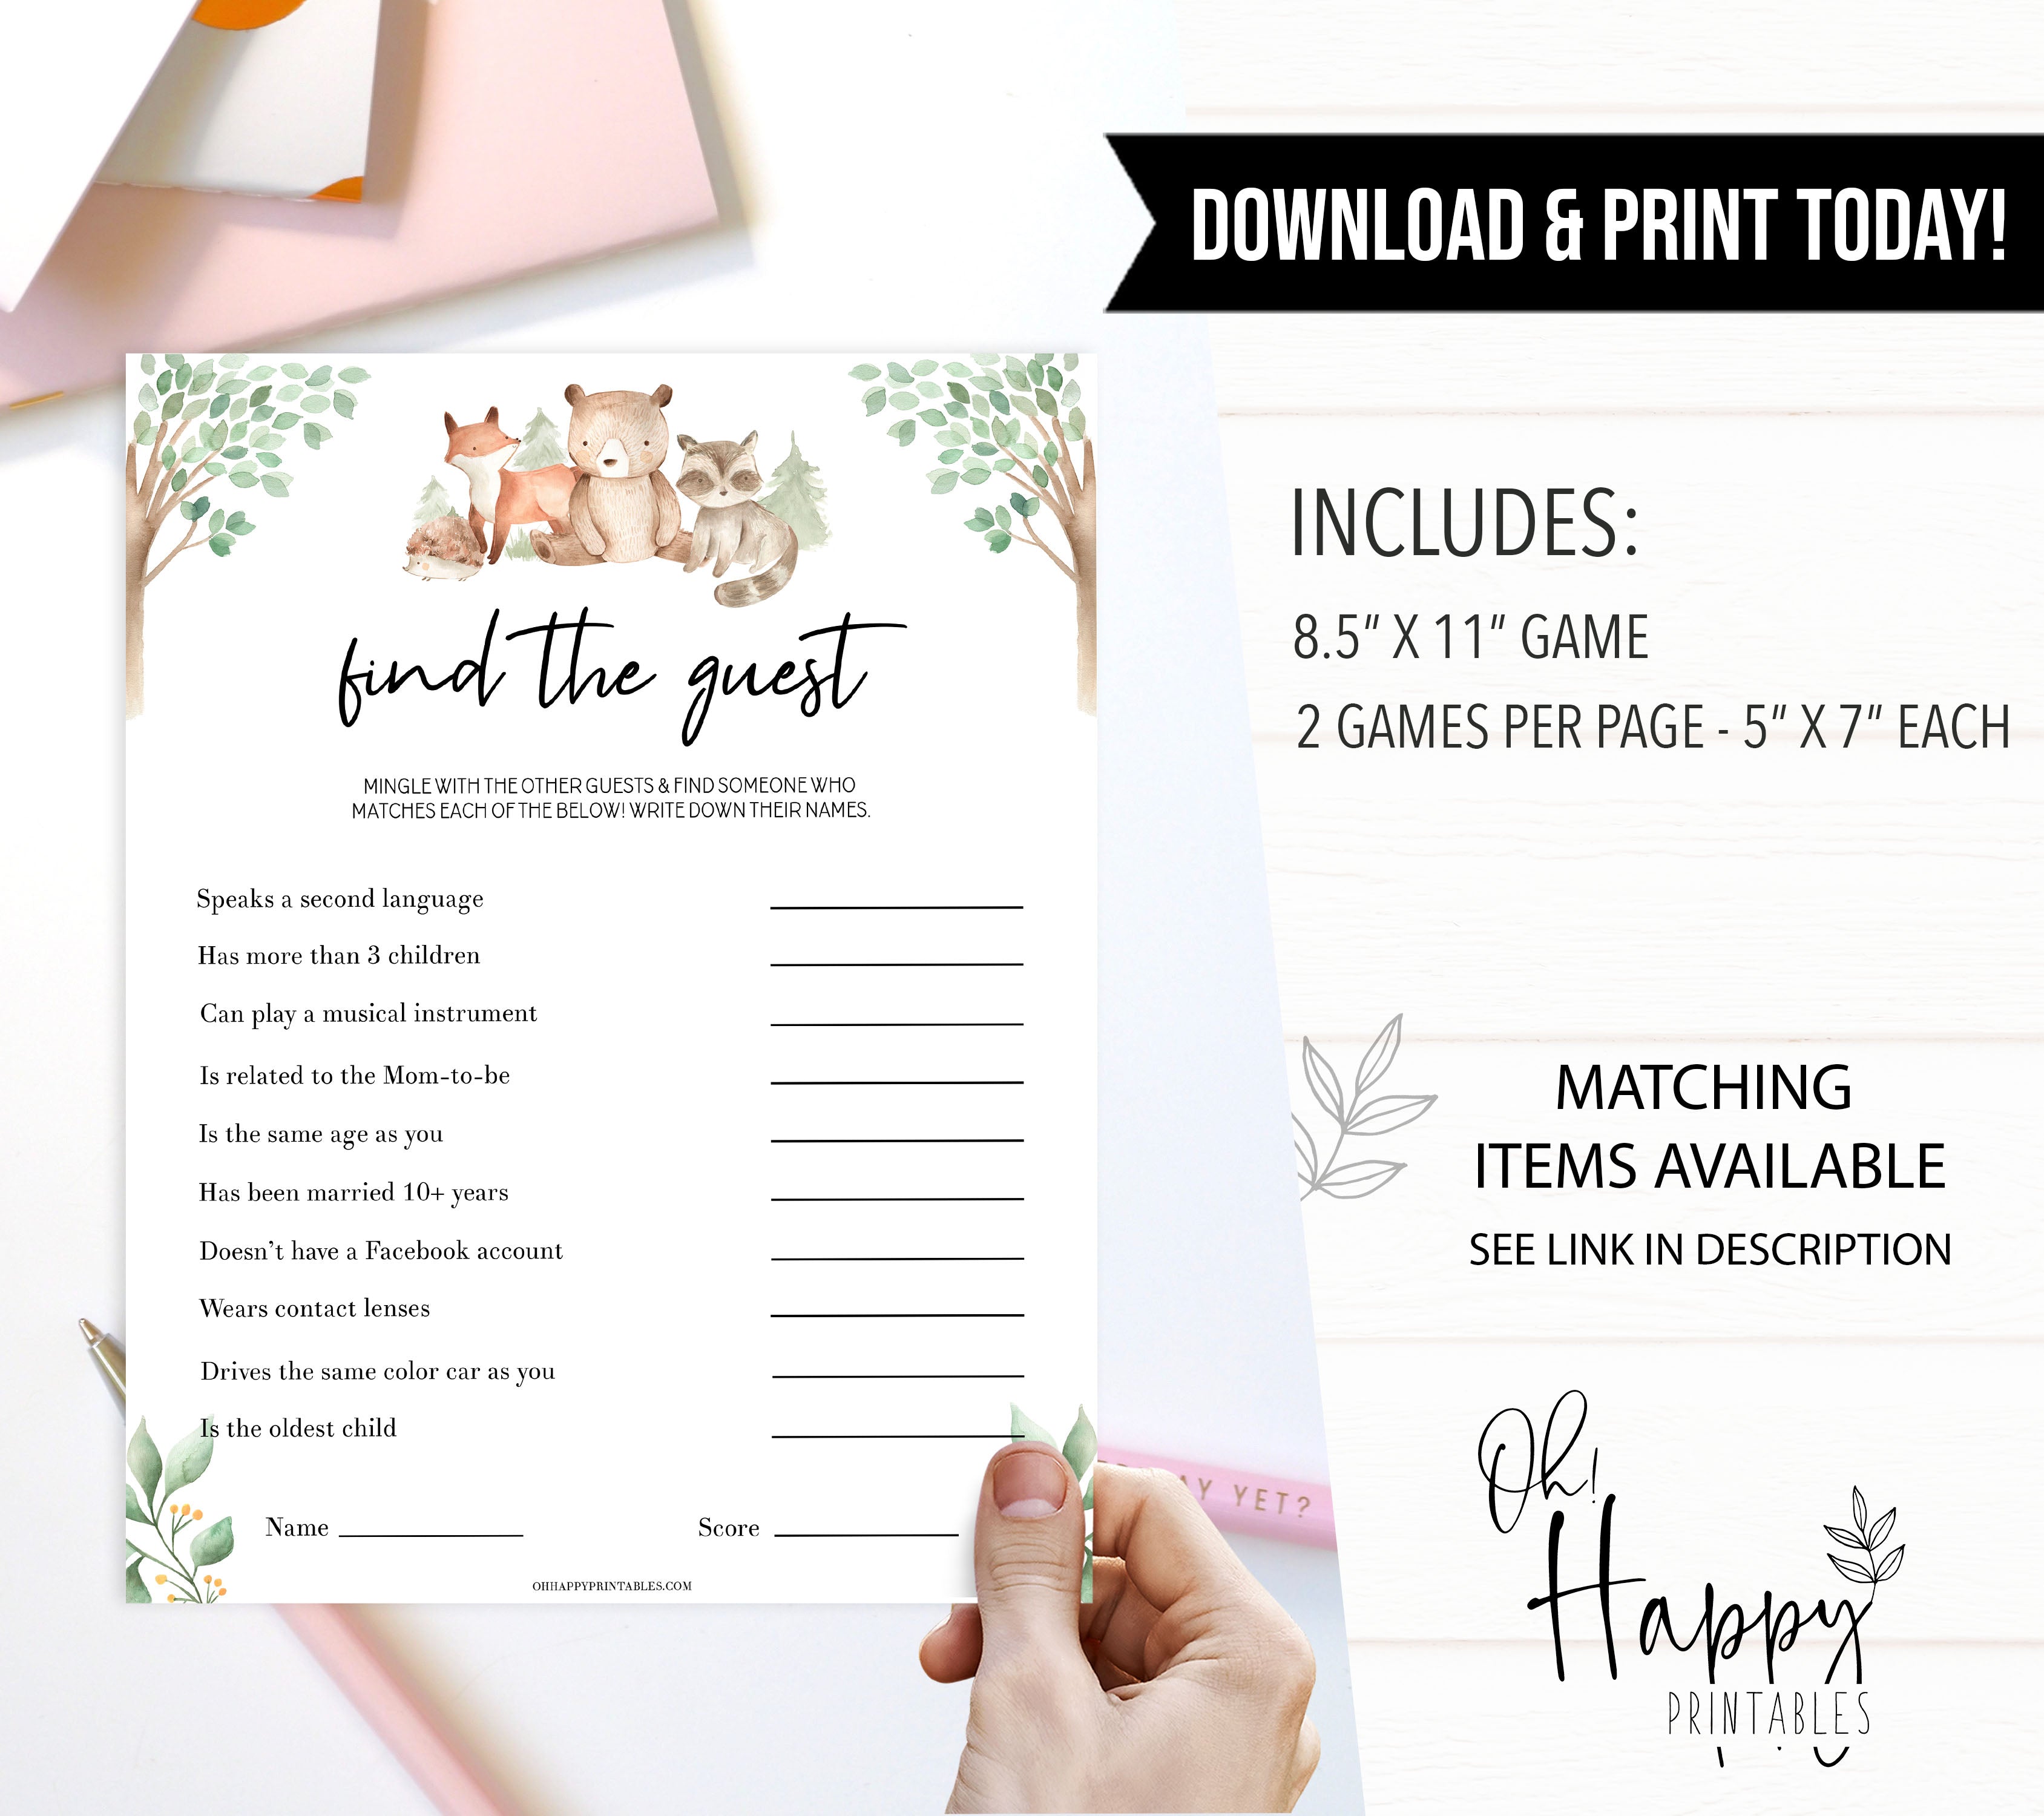 editable find the guest baby shower game, Printable baby shower games, woodland animals baby games, baby shower games, fun baby shower ideas, top baby shower ideas, woodland baby shower, baby shower games, fun woodland animals baby shower ideas